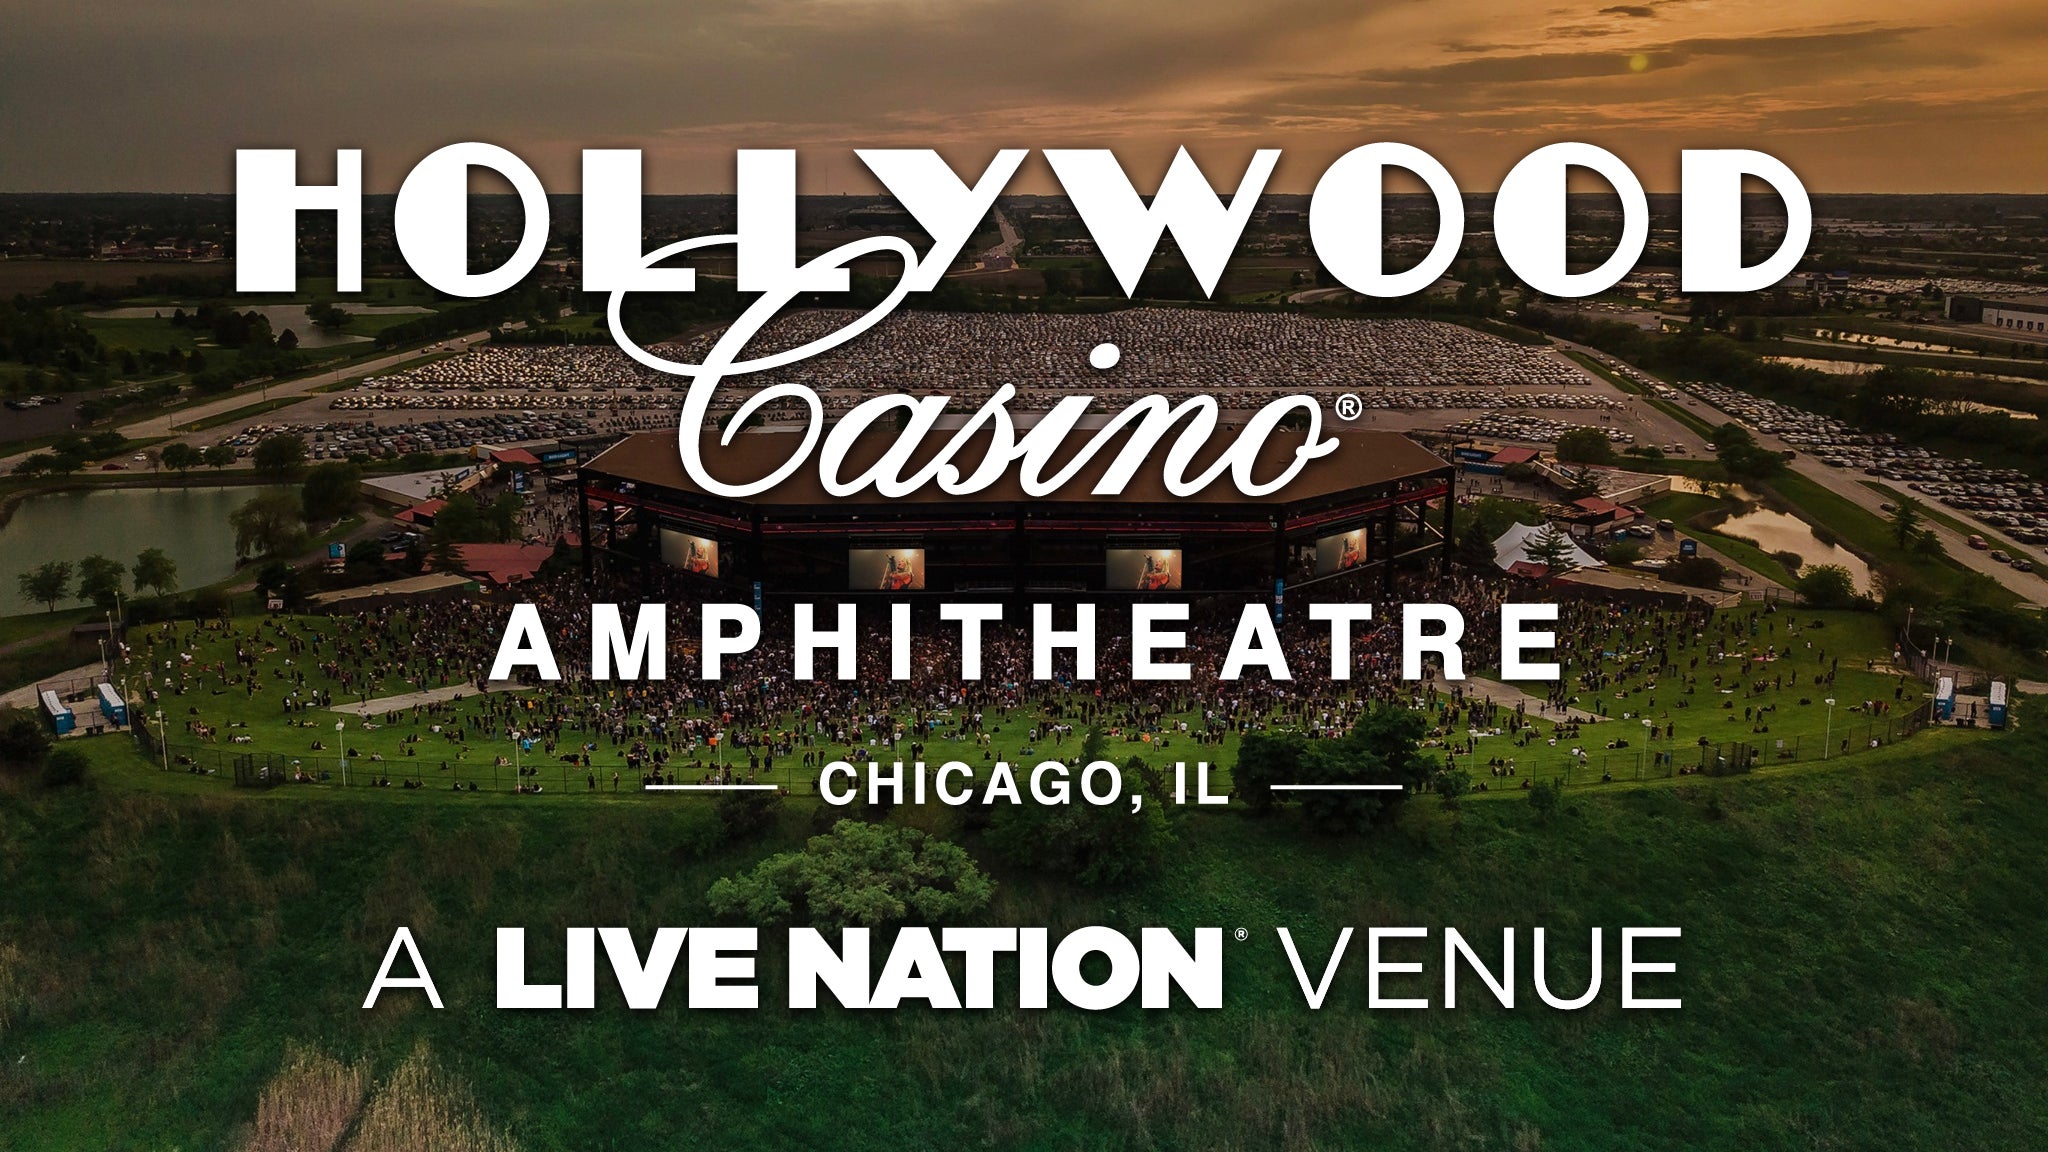 hollywood casino amphitheater rules and regulations